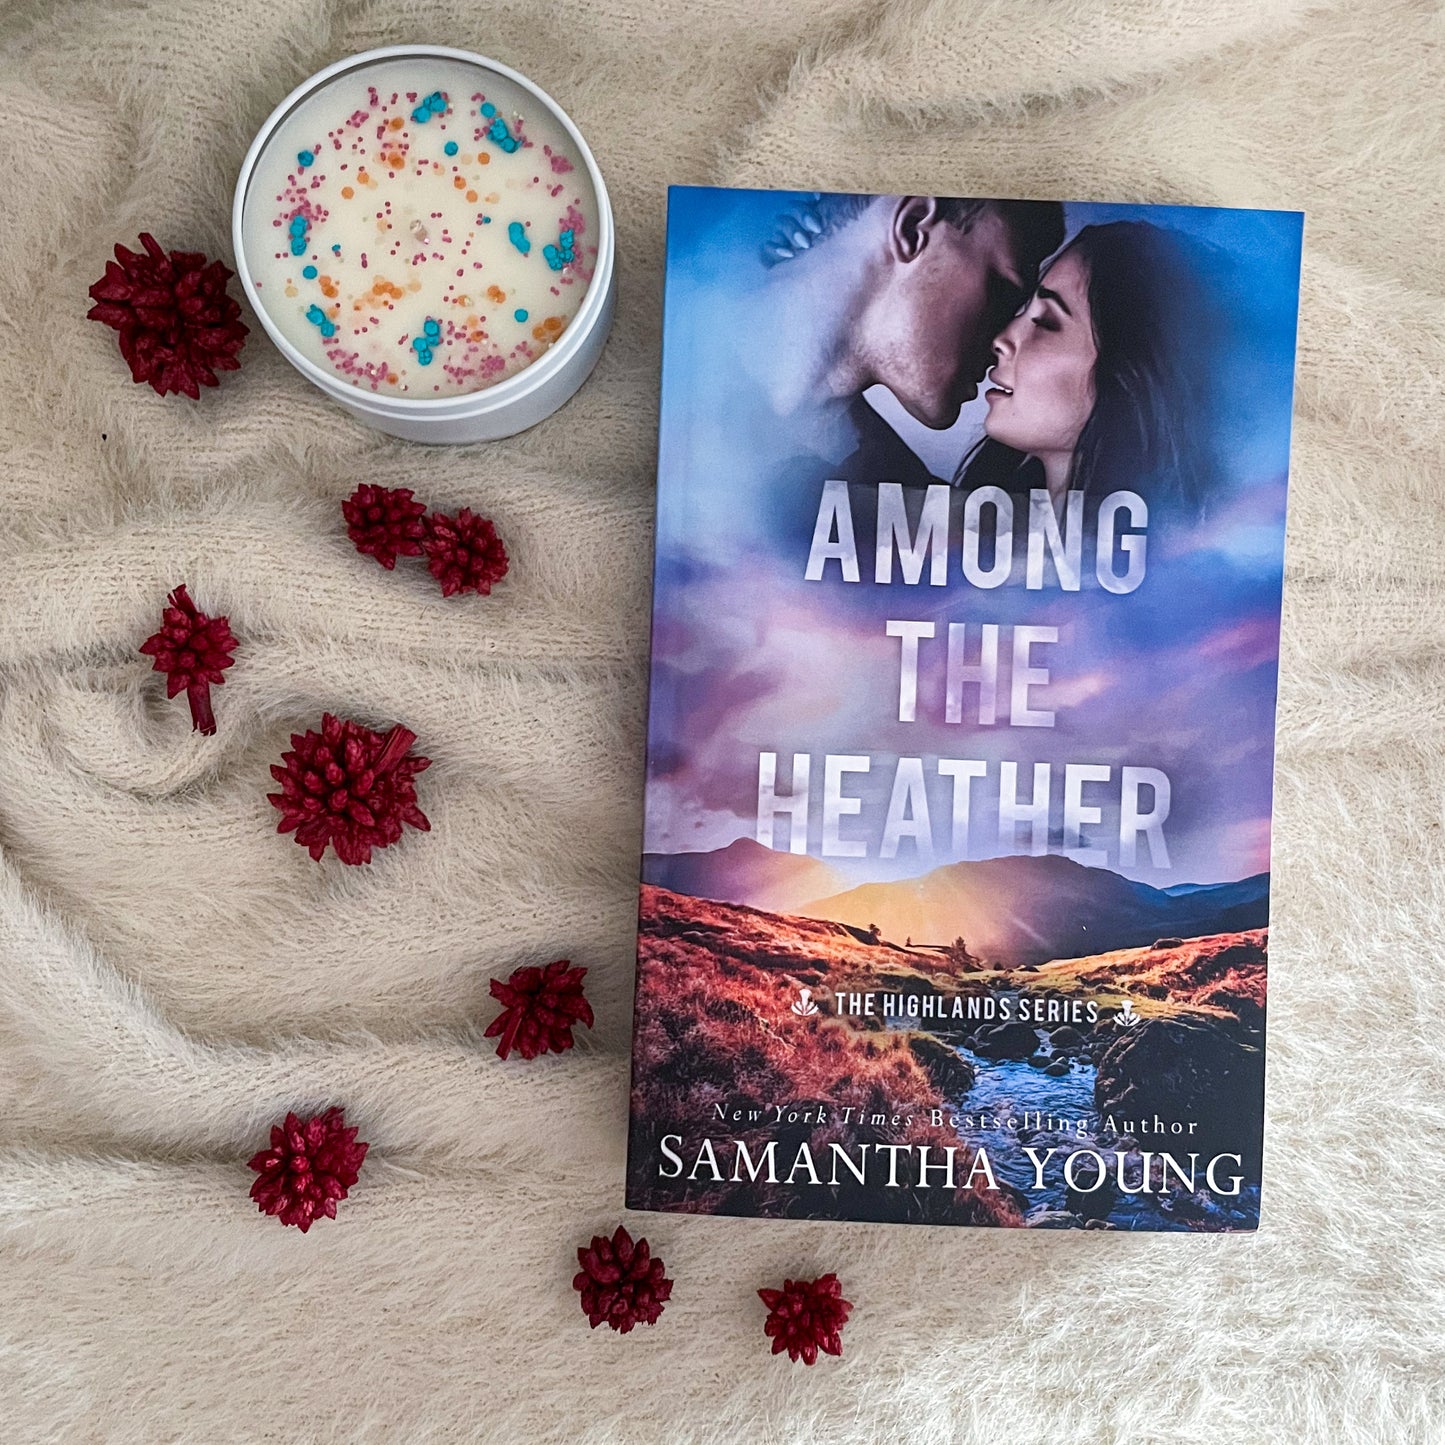 The Highlands series by Samantha Young